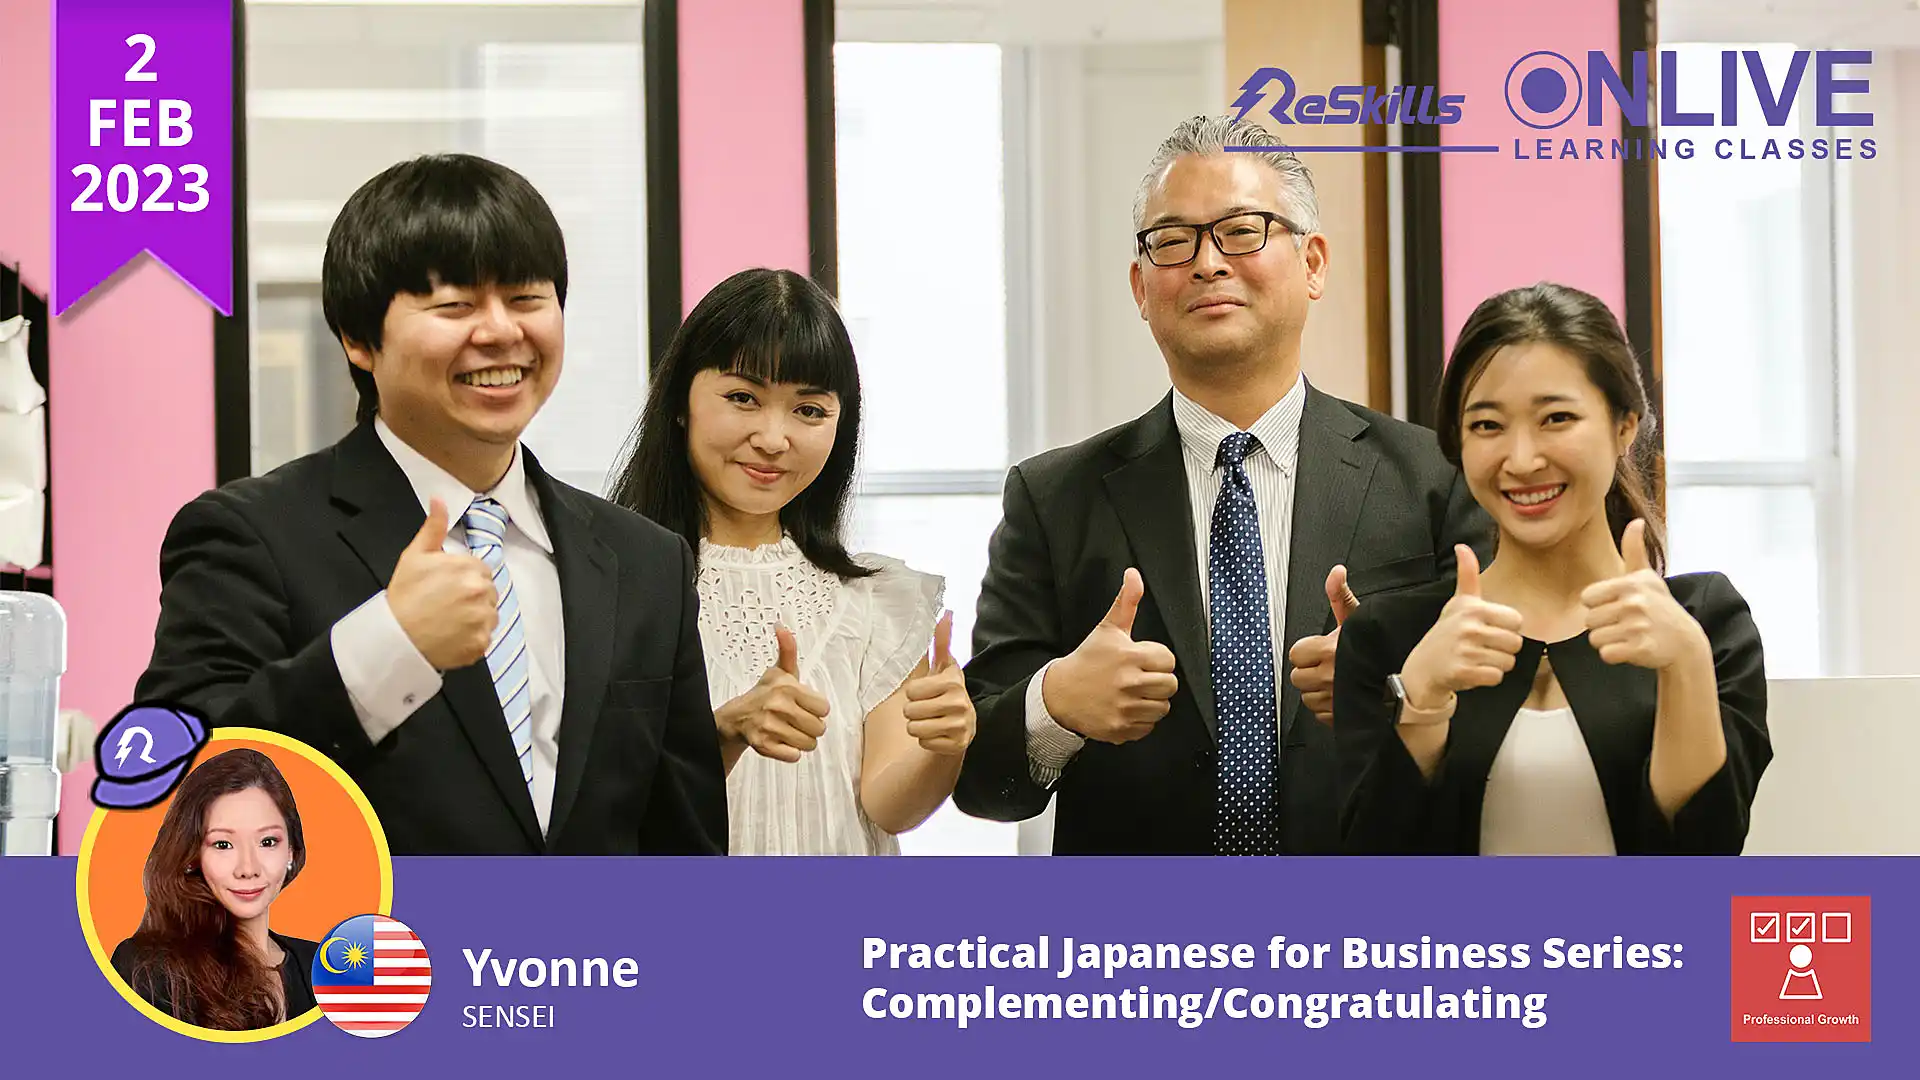 Practical Japanese for Business Series: Complementing/Congratulating - ReSkills